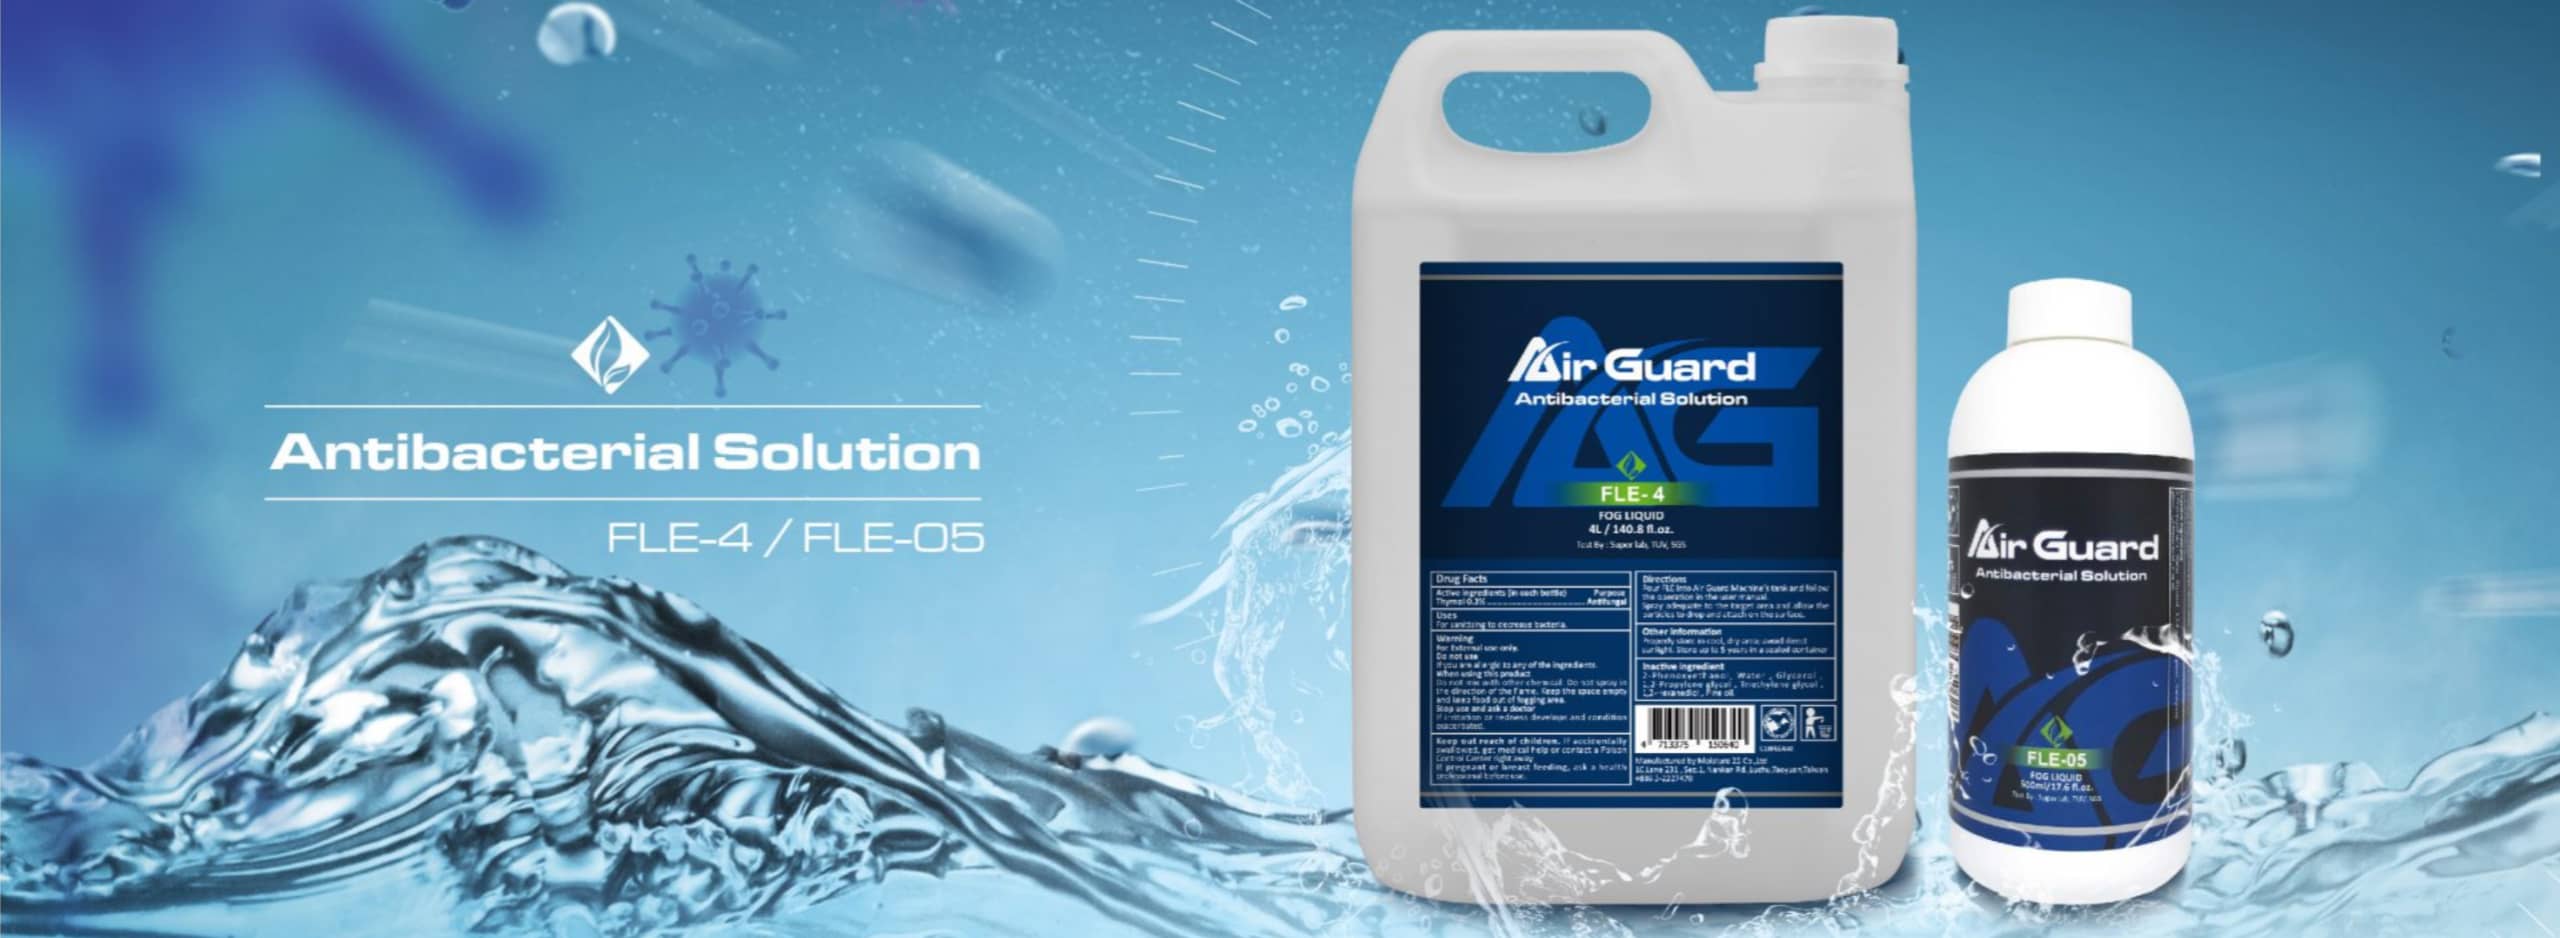 Air Guard - Easy Go, Easy Use! Portable design means you can use the disinfector anywhere - in your home, office, boat, car, anywhere! Eficiently eliminate the bad odor and bacteria, mold, fungi in short time.